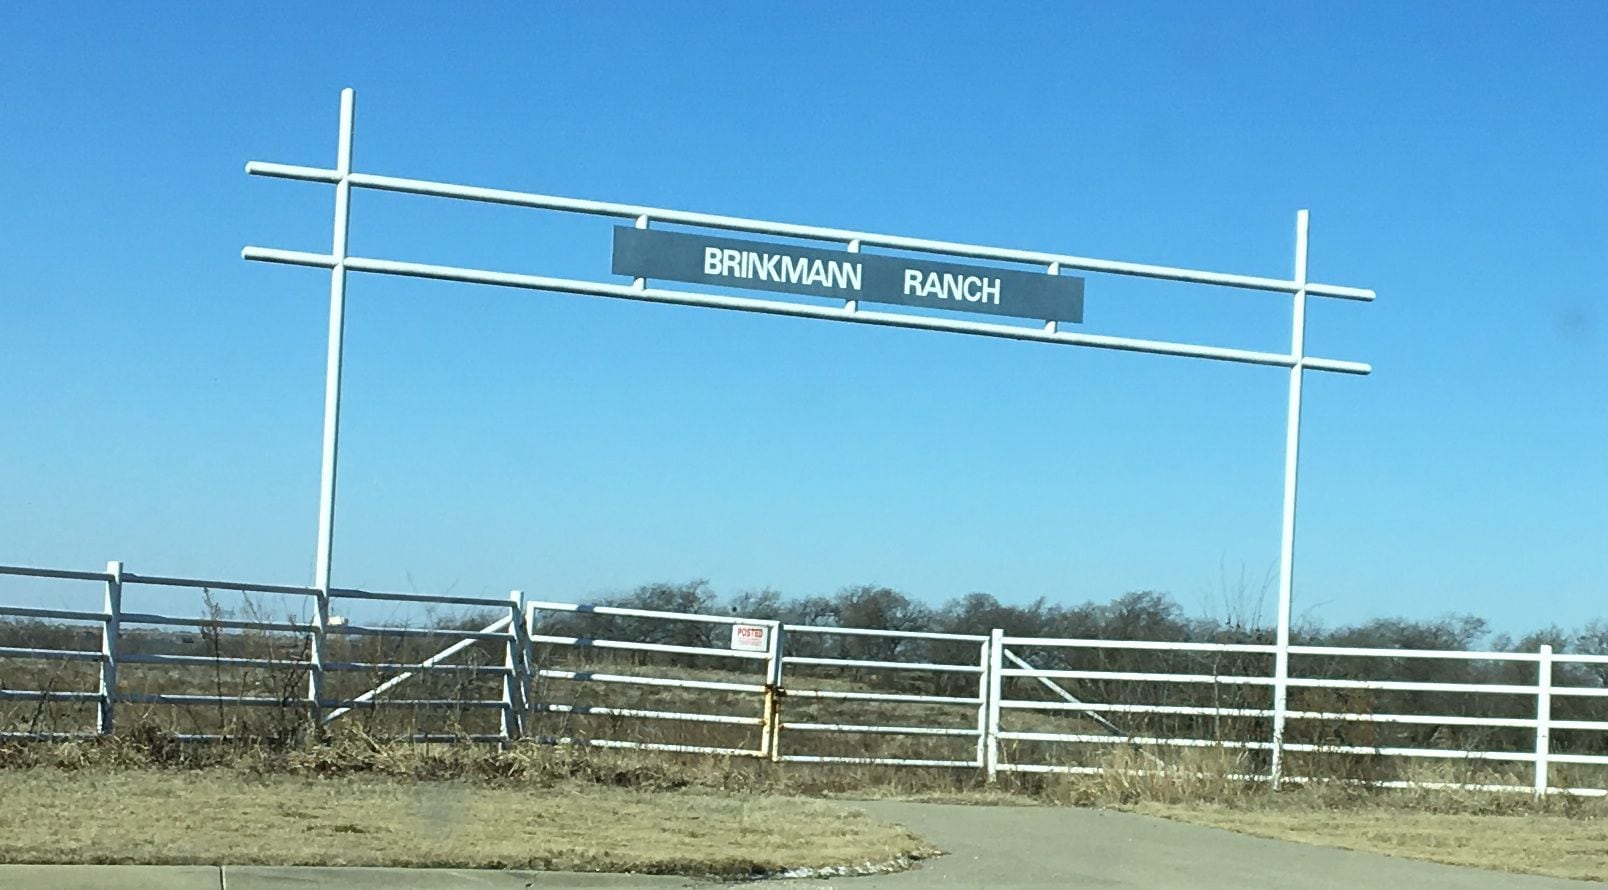 Landon Homes wants to build a new residential project on part of Frisco's Brinkmann Ranch.